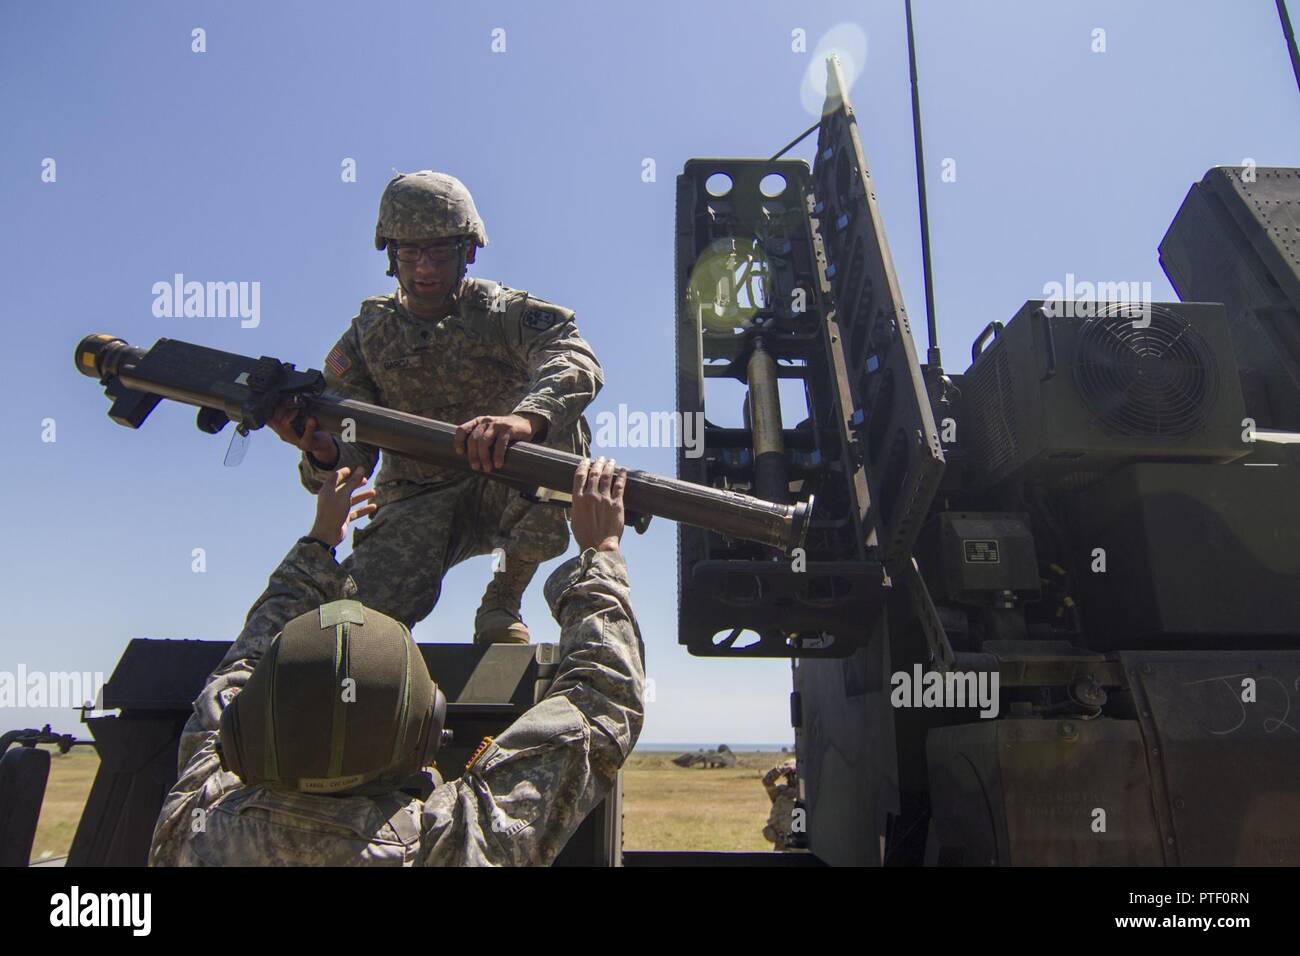 Soldiers with C Battery, 2nd battalion, 263rd Army Air and Missile Defense Command, South Carolina Army National Guard, load Stinger missiles into an AN/TWQ-1 Avenger air defense system before live fire training July 19, 2017, at Capu Midia, Romania, as part of exercise Saber Guardian 17. Saber Guardian is a U.S. Army Europe-led, multinational exercise that spans across Bulgaria, Hungary and Romania with more than 25,000 service members from 22 allied and partner nations. Stock Photo